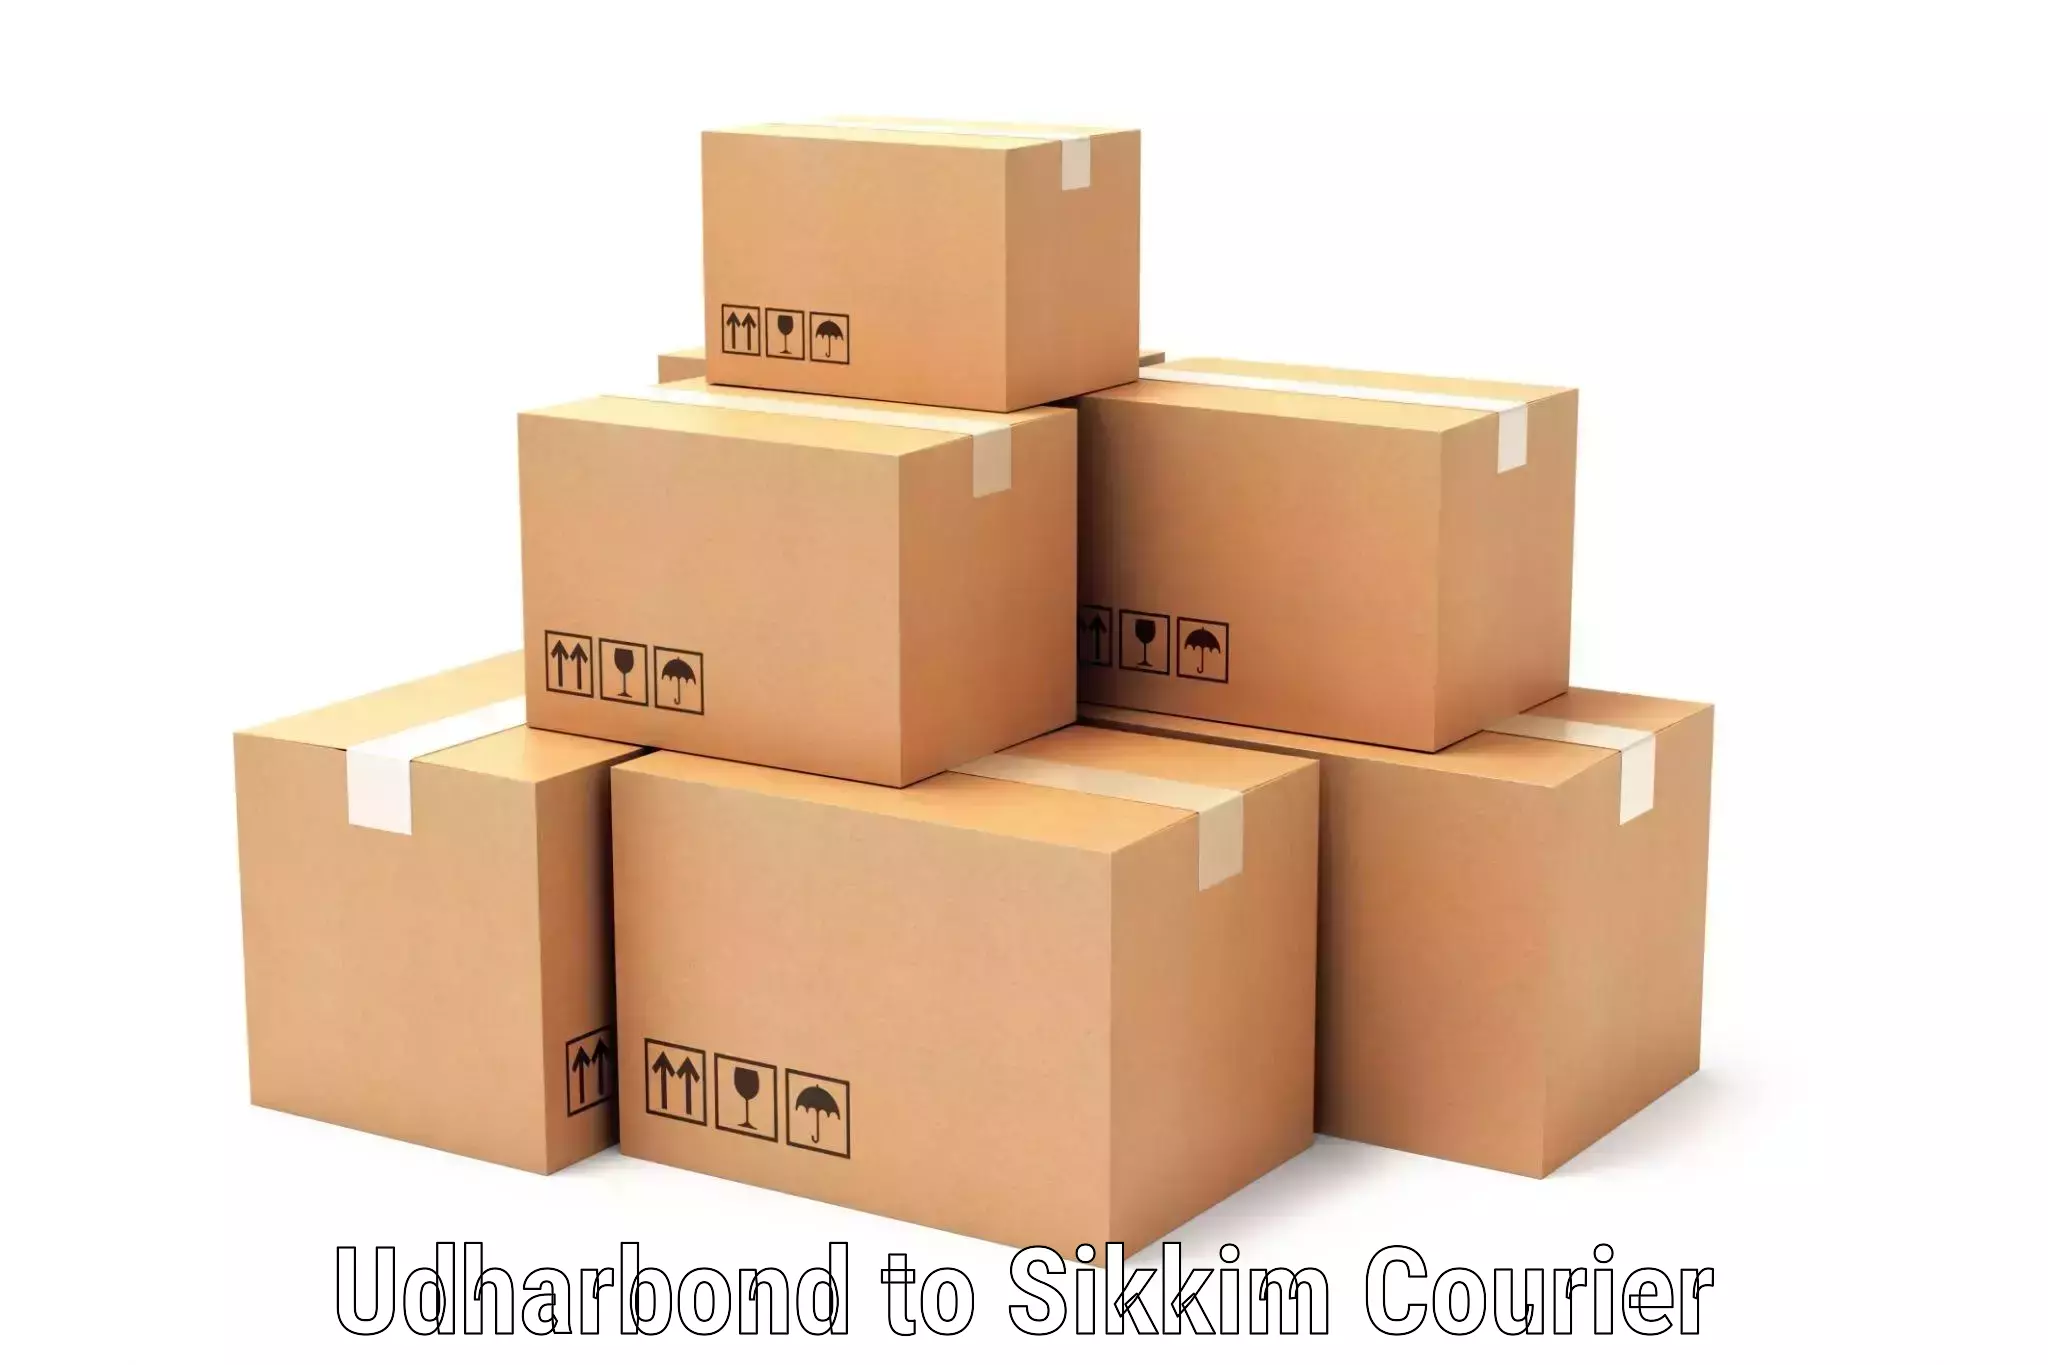 Shipping and handling Udharbond to East Sikkim